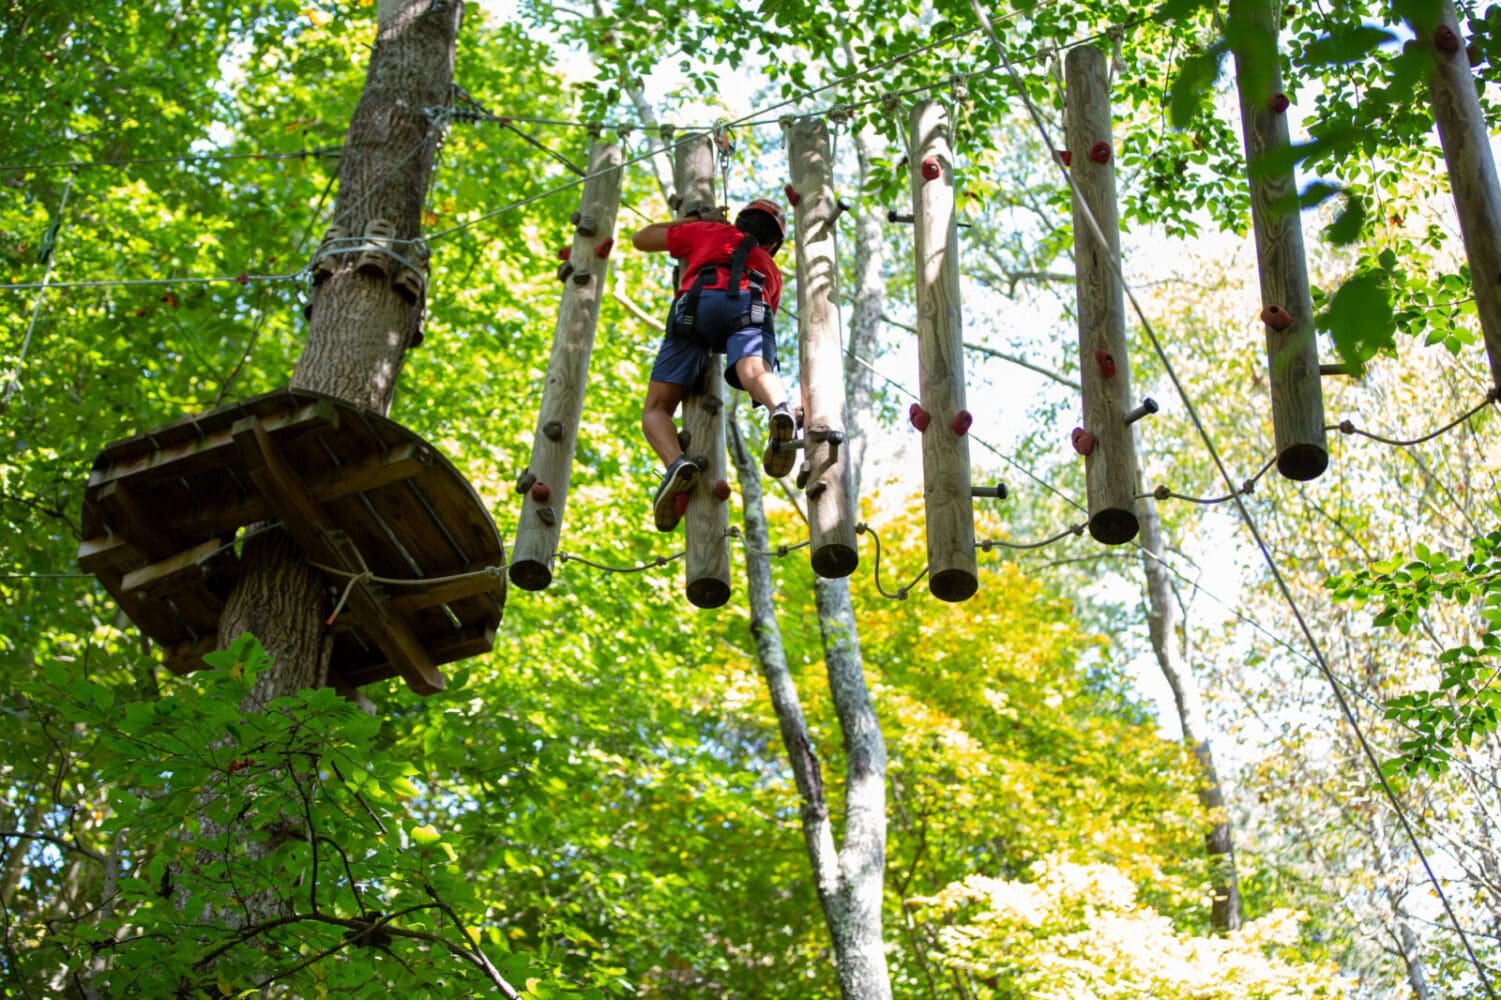 Student on a high-ropes course